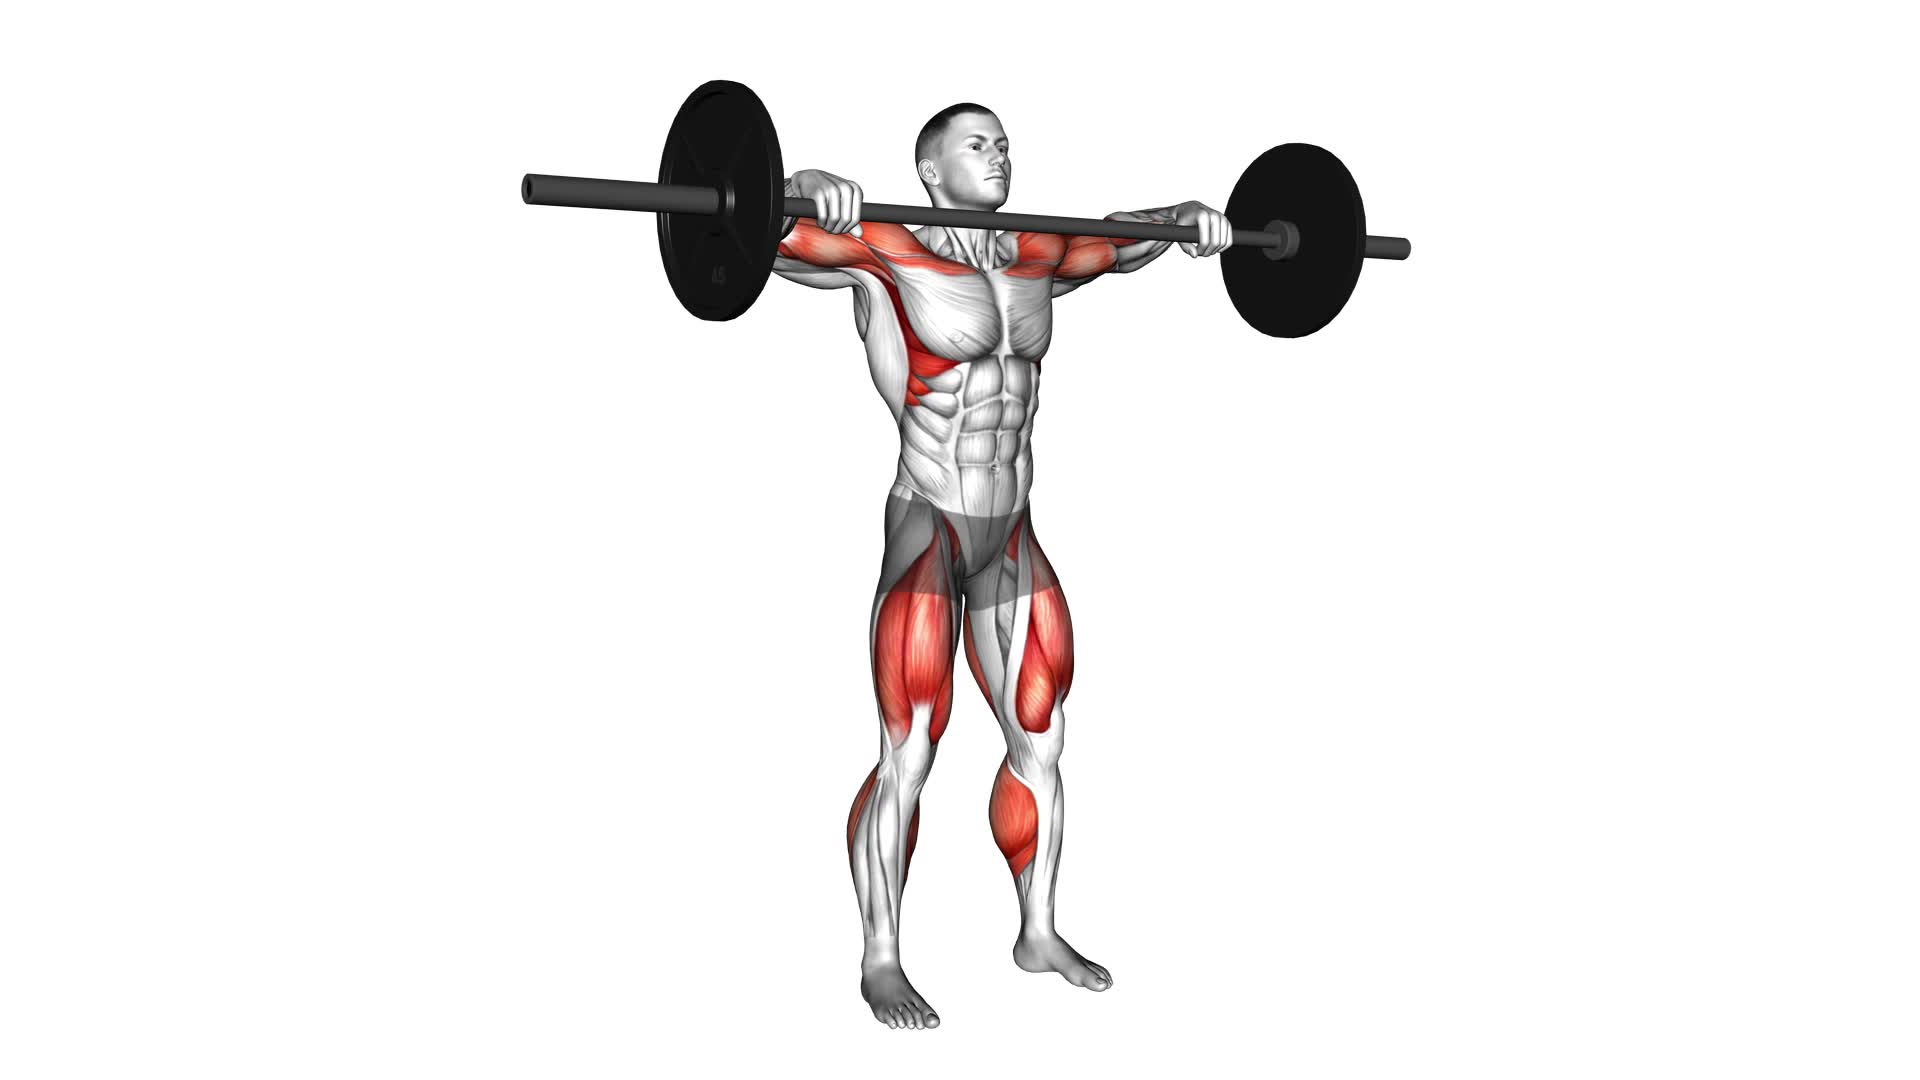 Snatch High Pull - Video Exercise Guide & Tips